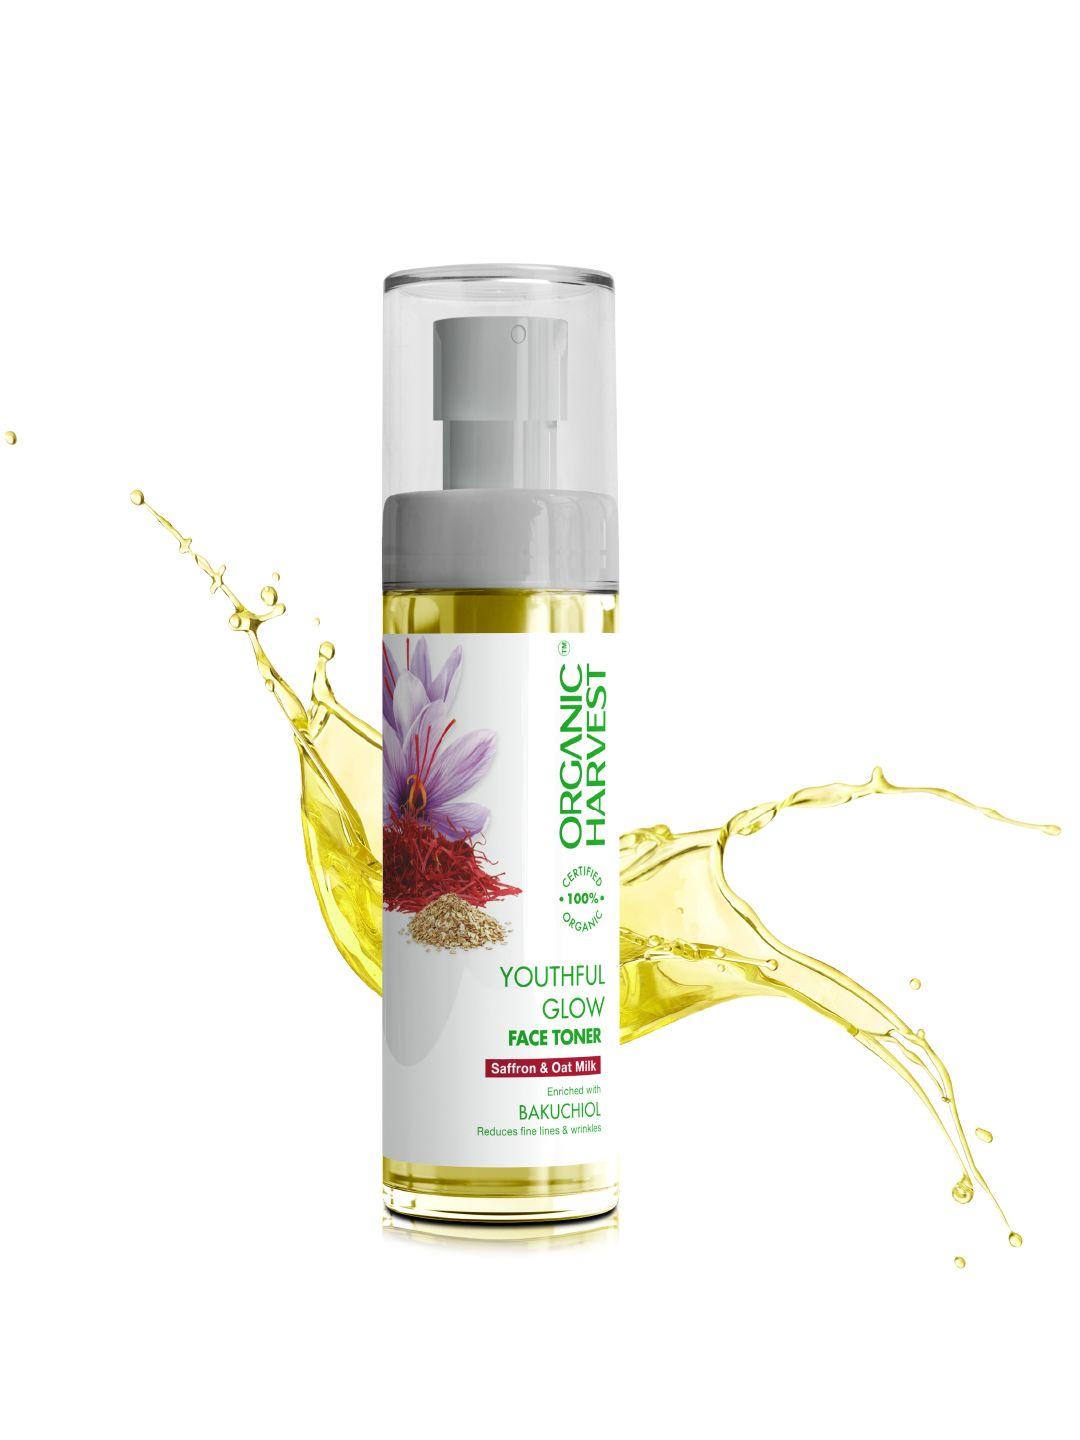 organic harvest youthful glow face toner with saffron & oat milk extracts